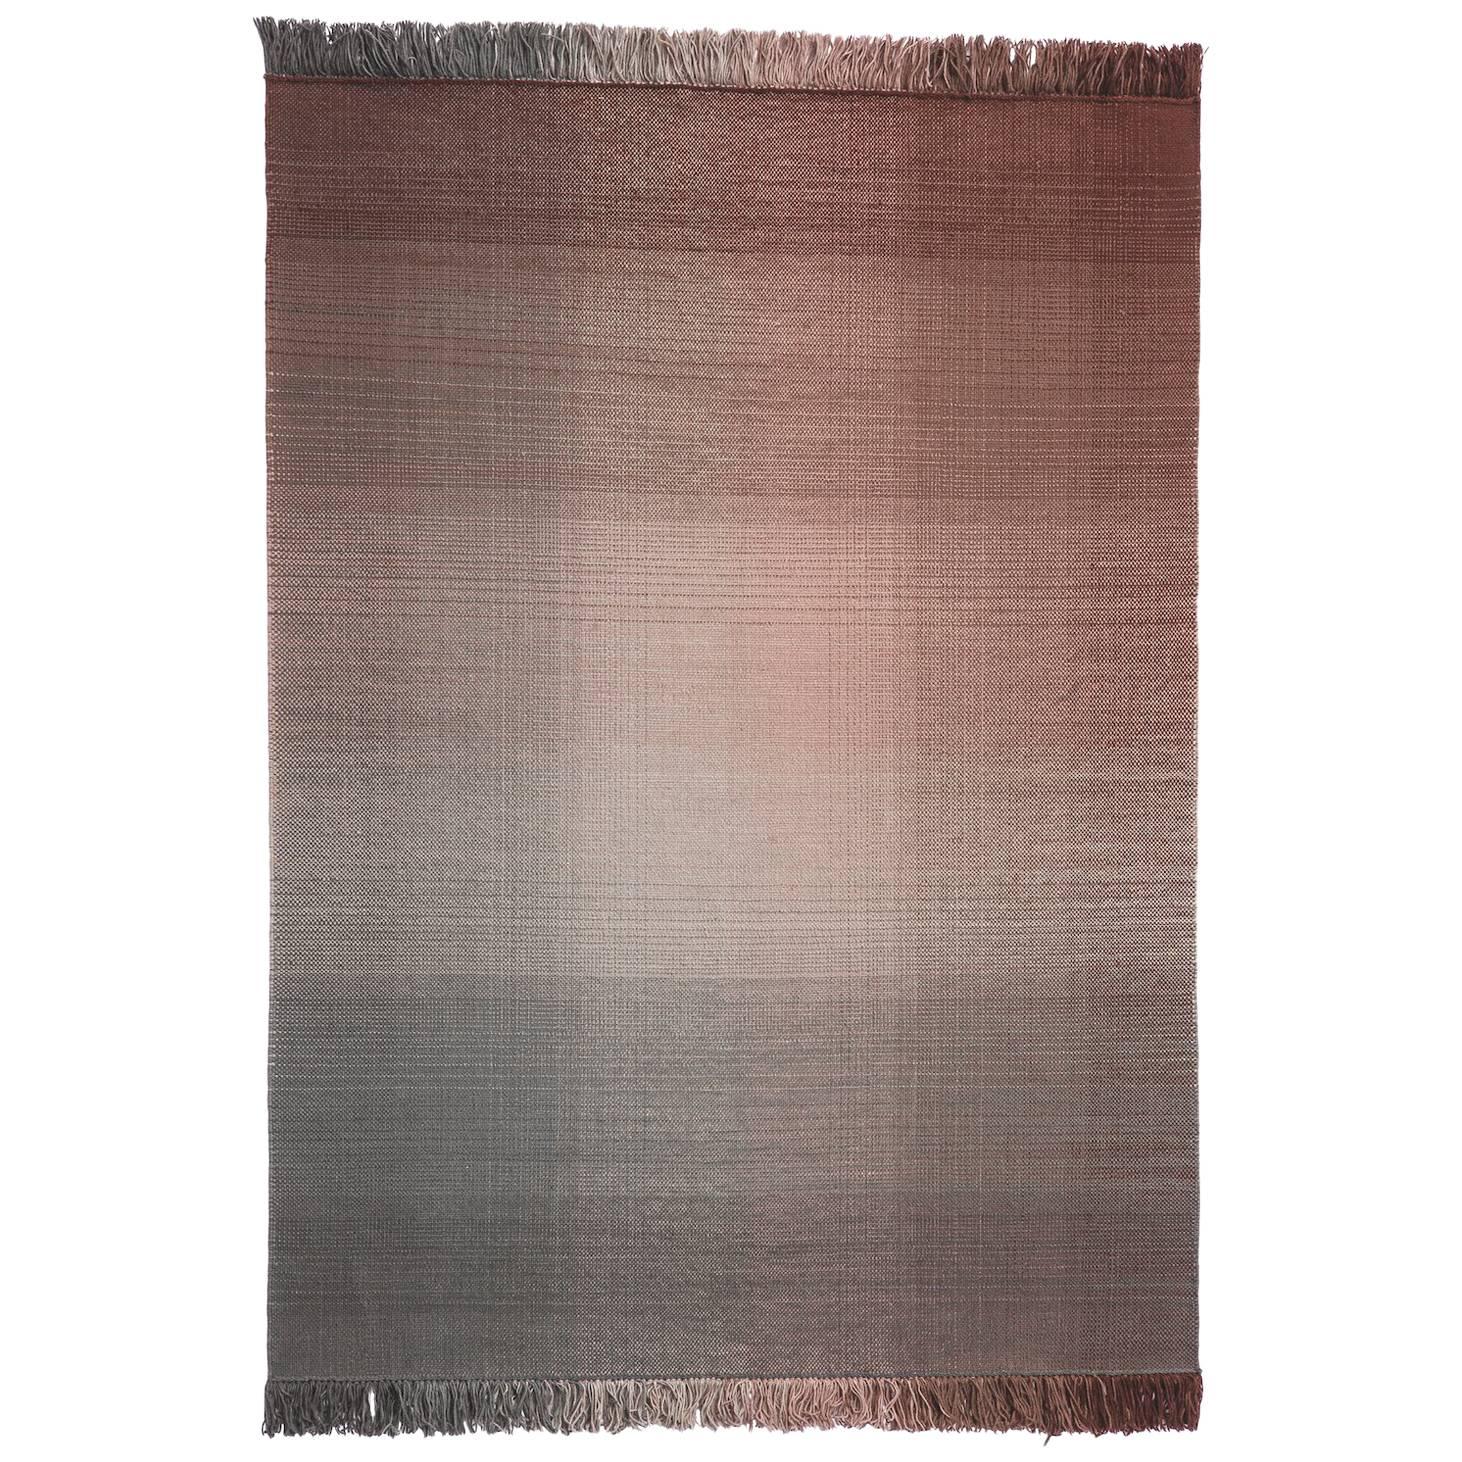 Hand-Loomed Nanimarquina Shade Rug Palette 4 by Begum Cana Ozgur, Small